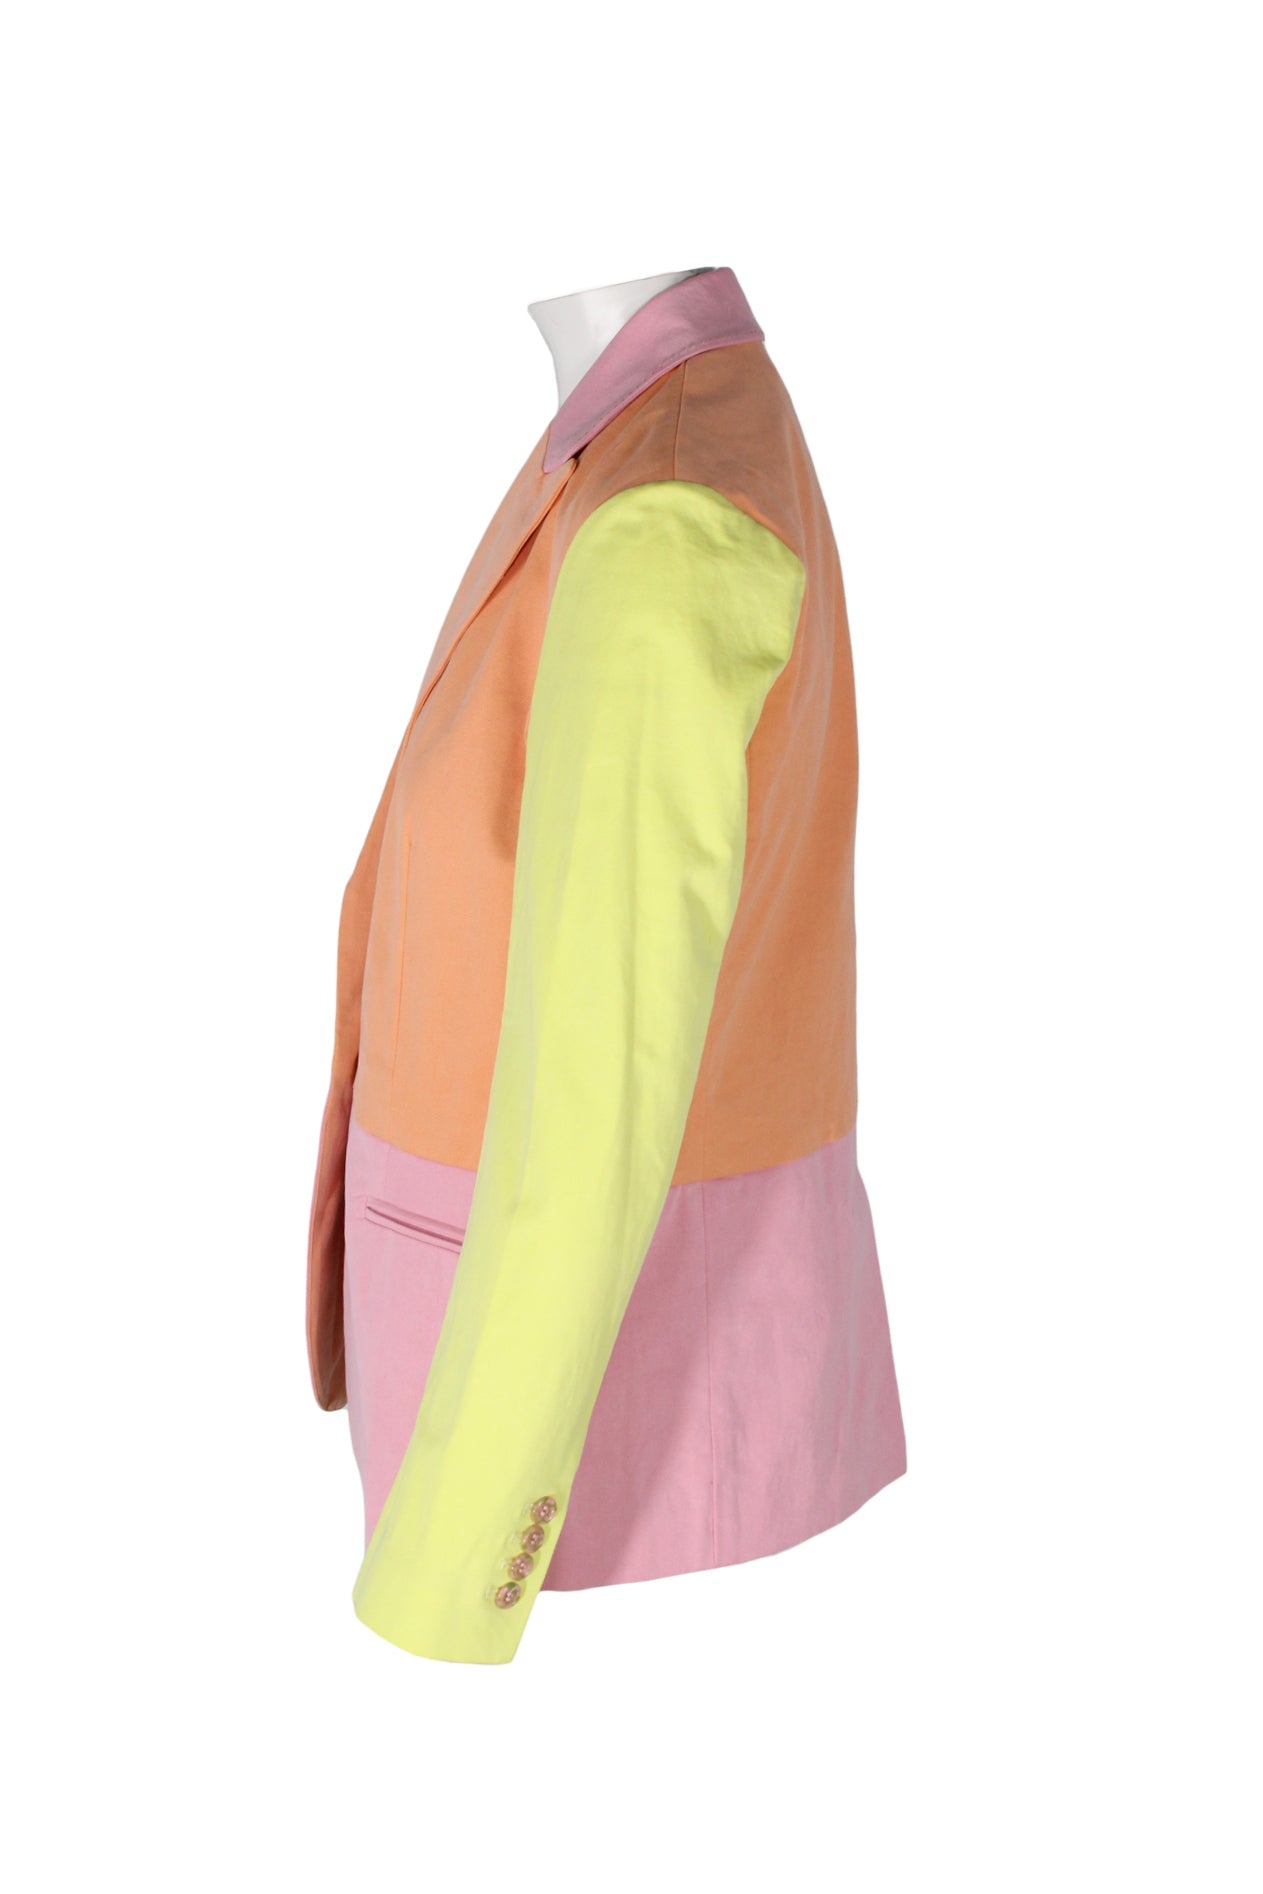 side angle tanya taylor pastel ‘darwin’ colorblock blazer on feminine mannequin torso featuring jetted lower pockets and decorative 4-button cuffs.